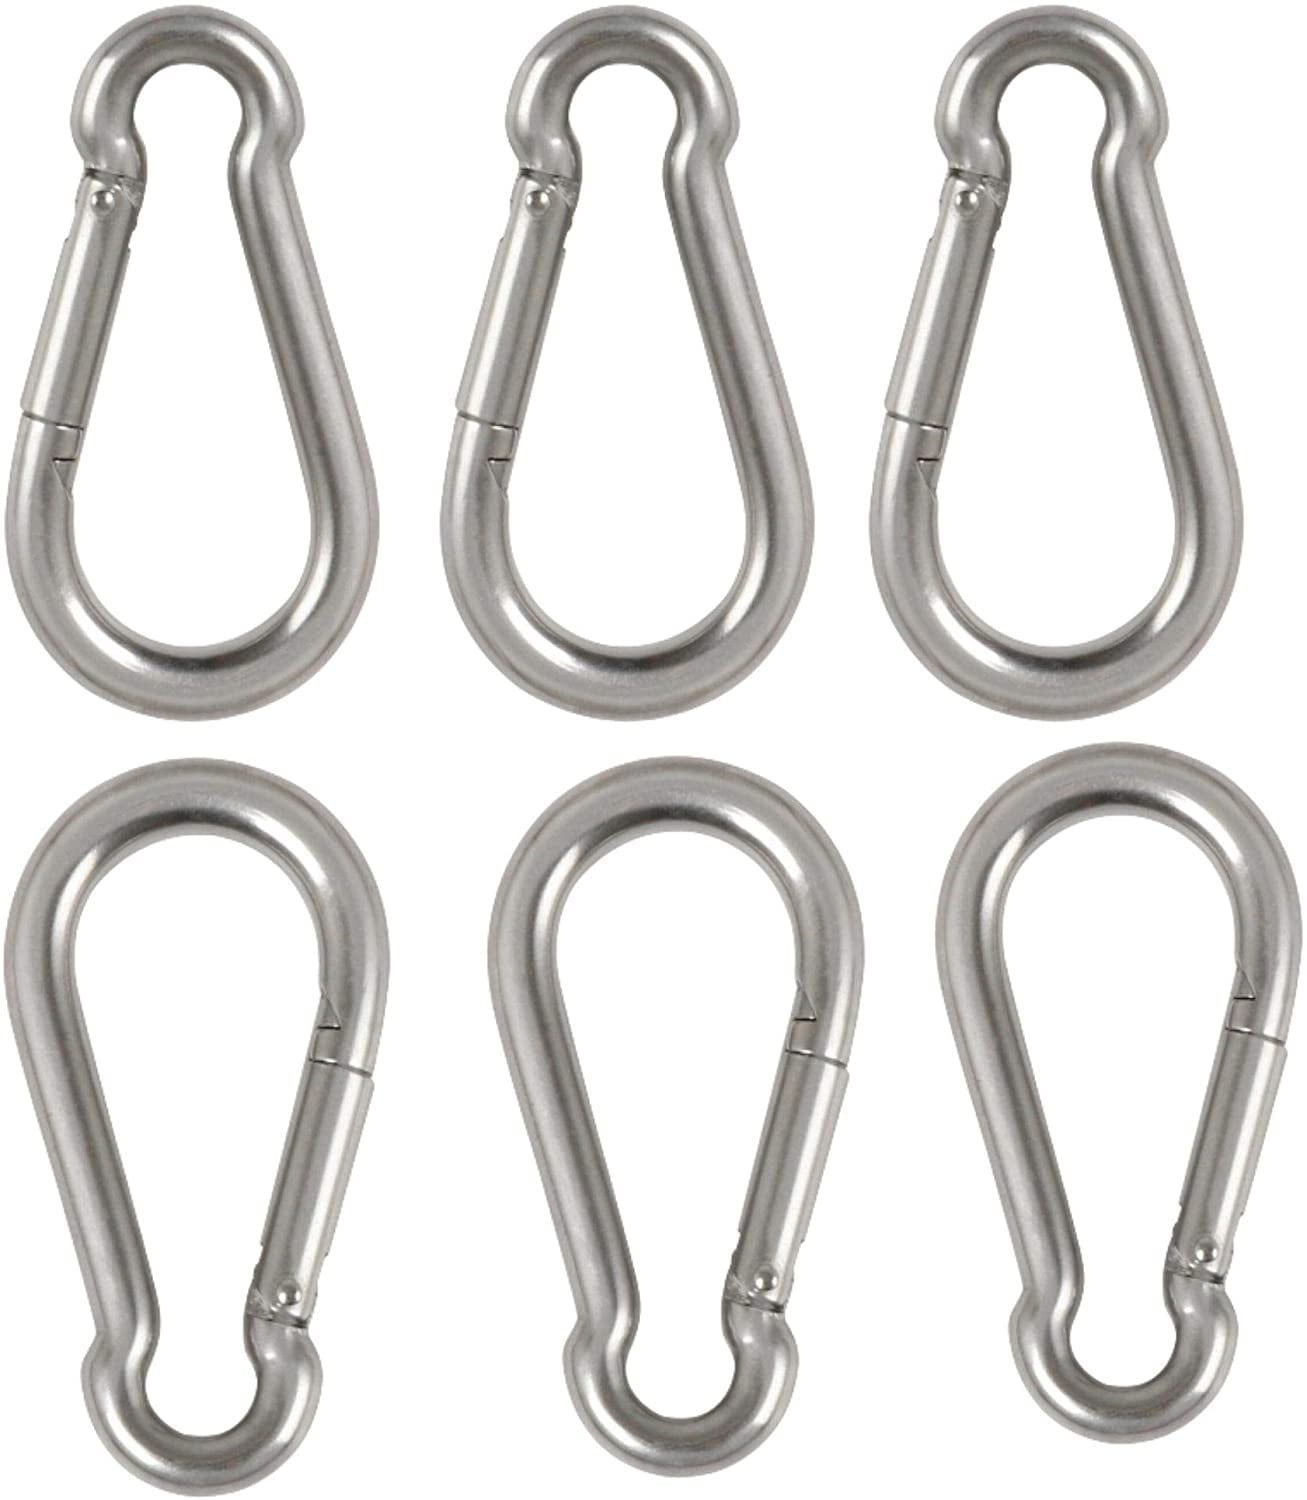 Performore 2 1/4 Inches Stainless Steel Safety Spring Snap Hook Carabiner,  Multi-Purpose Heavy Duty Stainless Steel Carabiner Clips for Keys Swing Set  Camping Fishing Hiking Traveling (Pack of 6) 